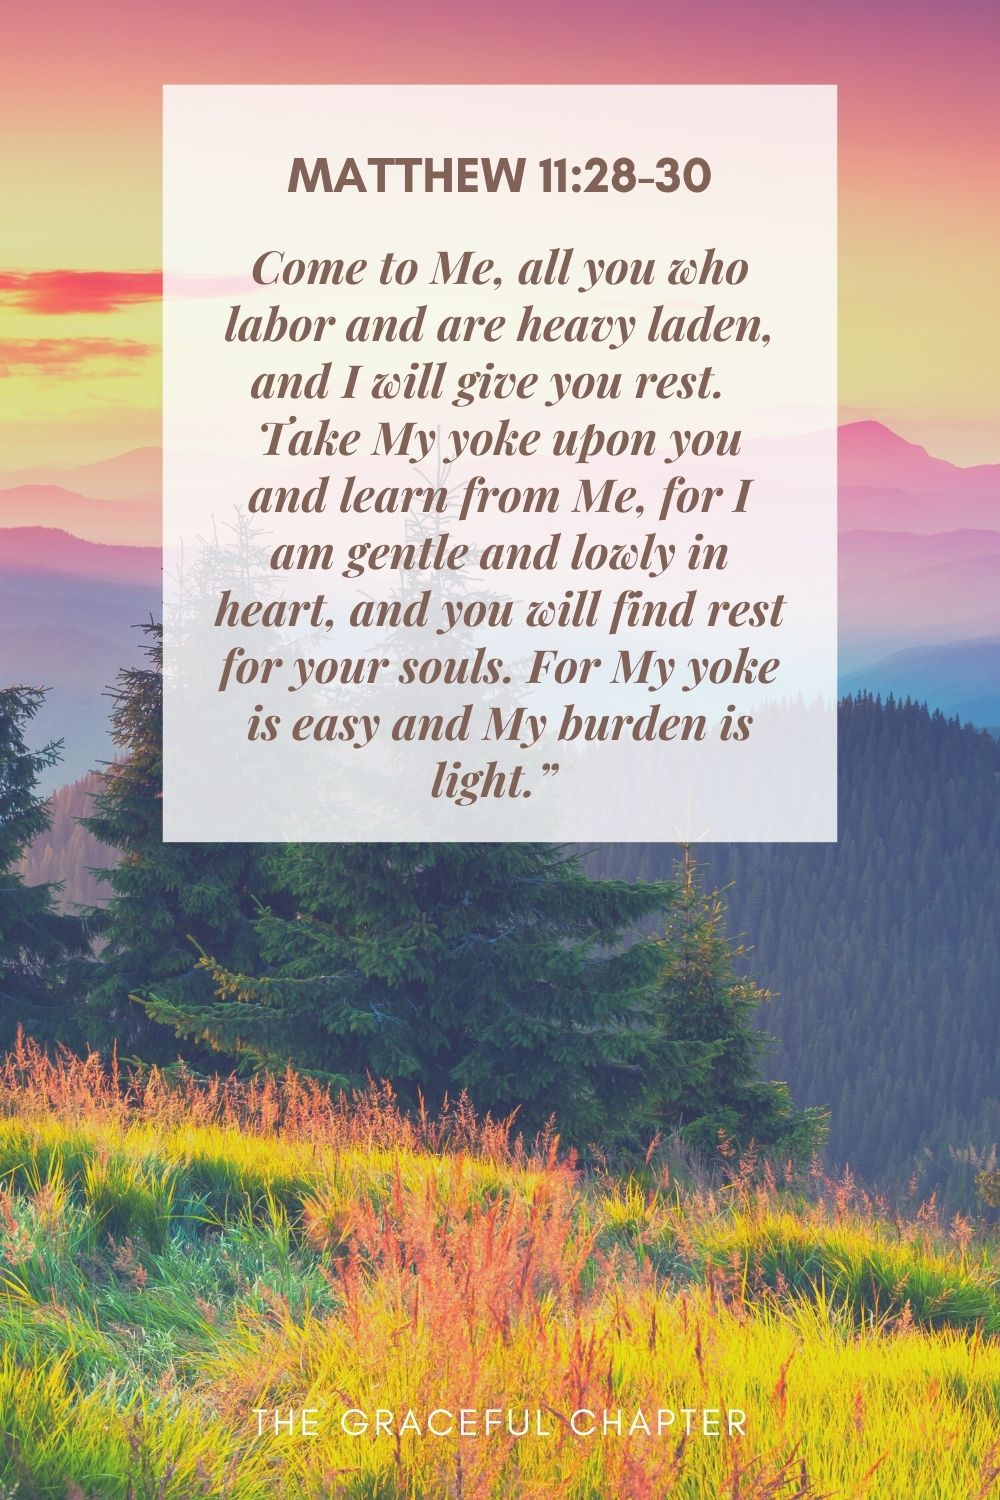 Come to Me, all you who labor and are heavy laden, and I will give you rest.  Take My yoke upon you and learn from Me, for I am gentle and lowly in heart, and you will find rest for your souls. For My yoke is easy and My burden is light.”  Matthew 11:28-30